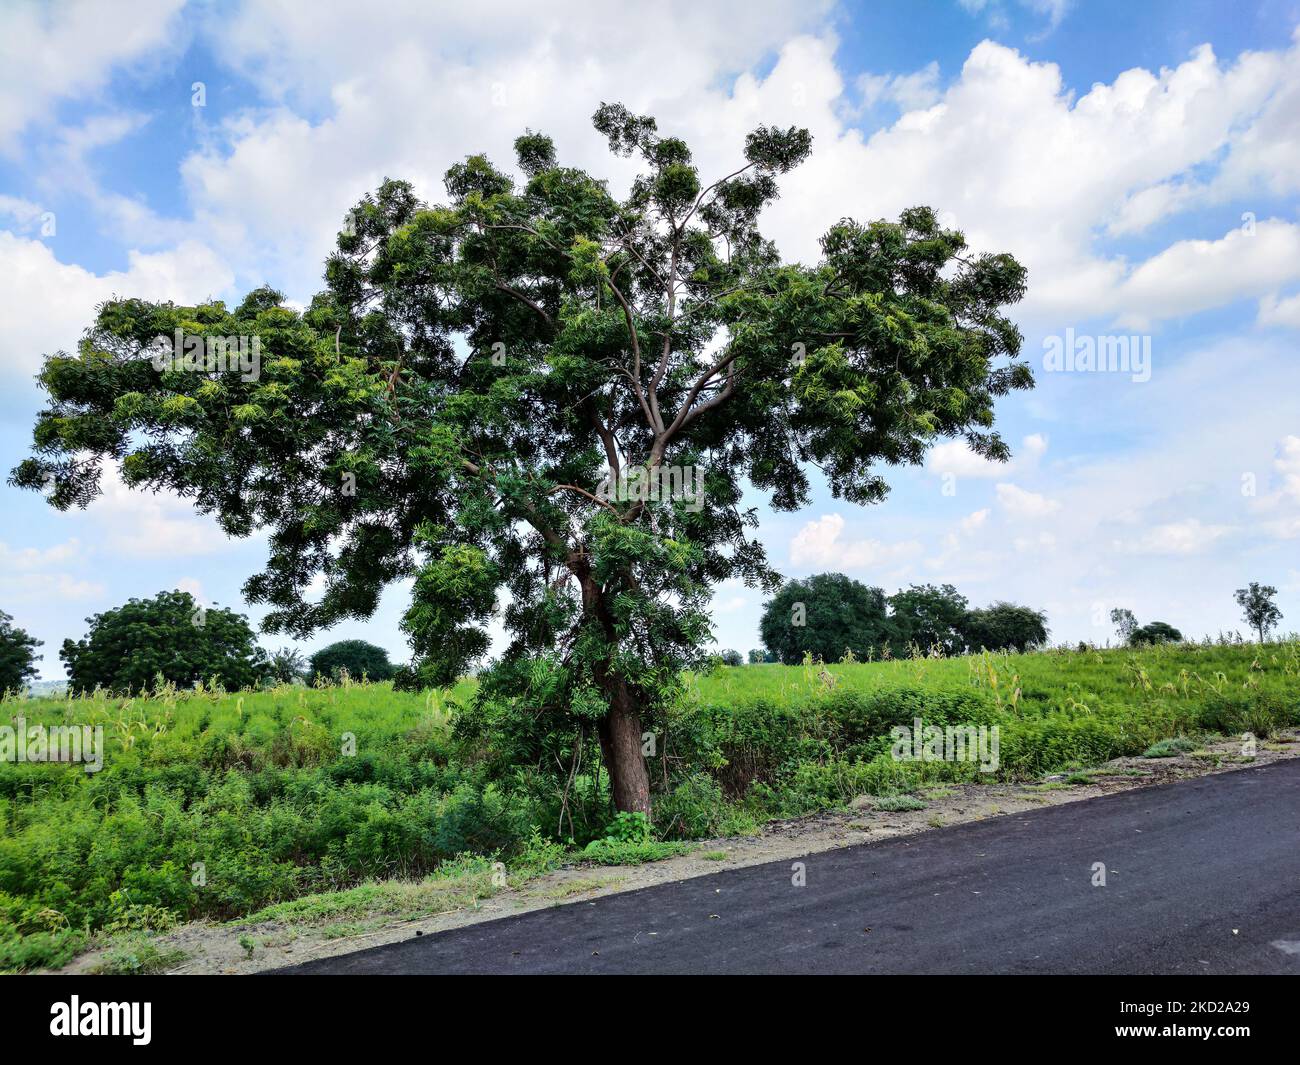 A beautiful shot of Indian lilac tree (Azadirachta indica) with green plants and grass around it Stock Photo